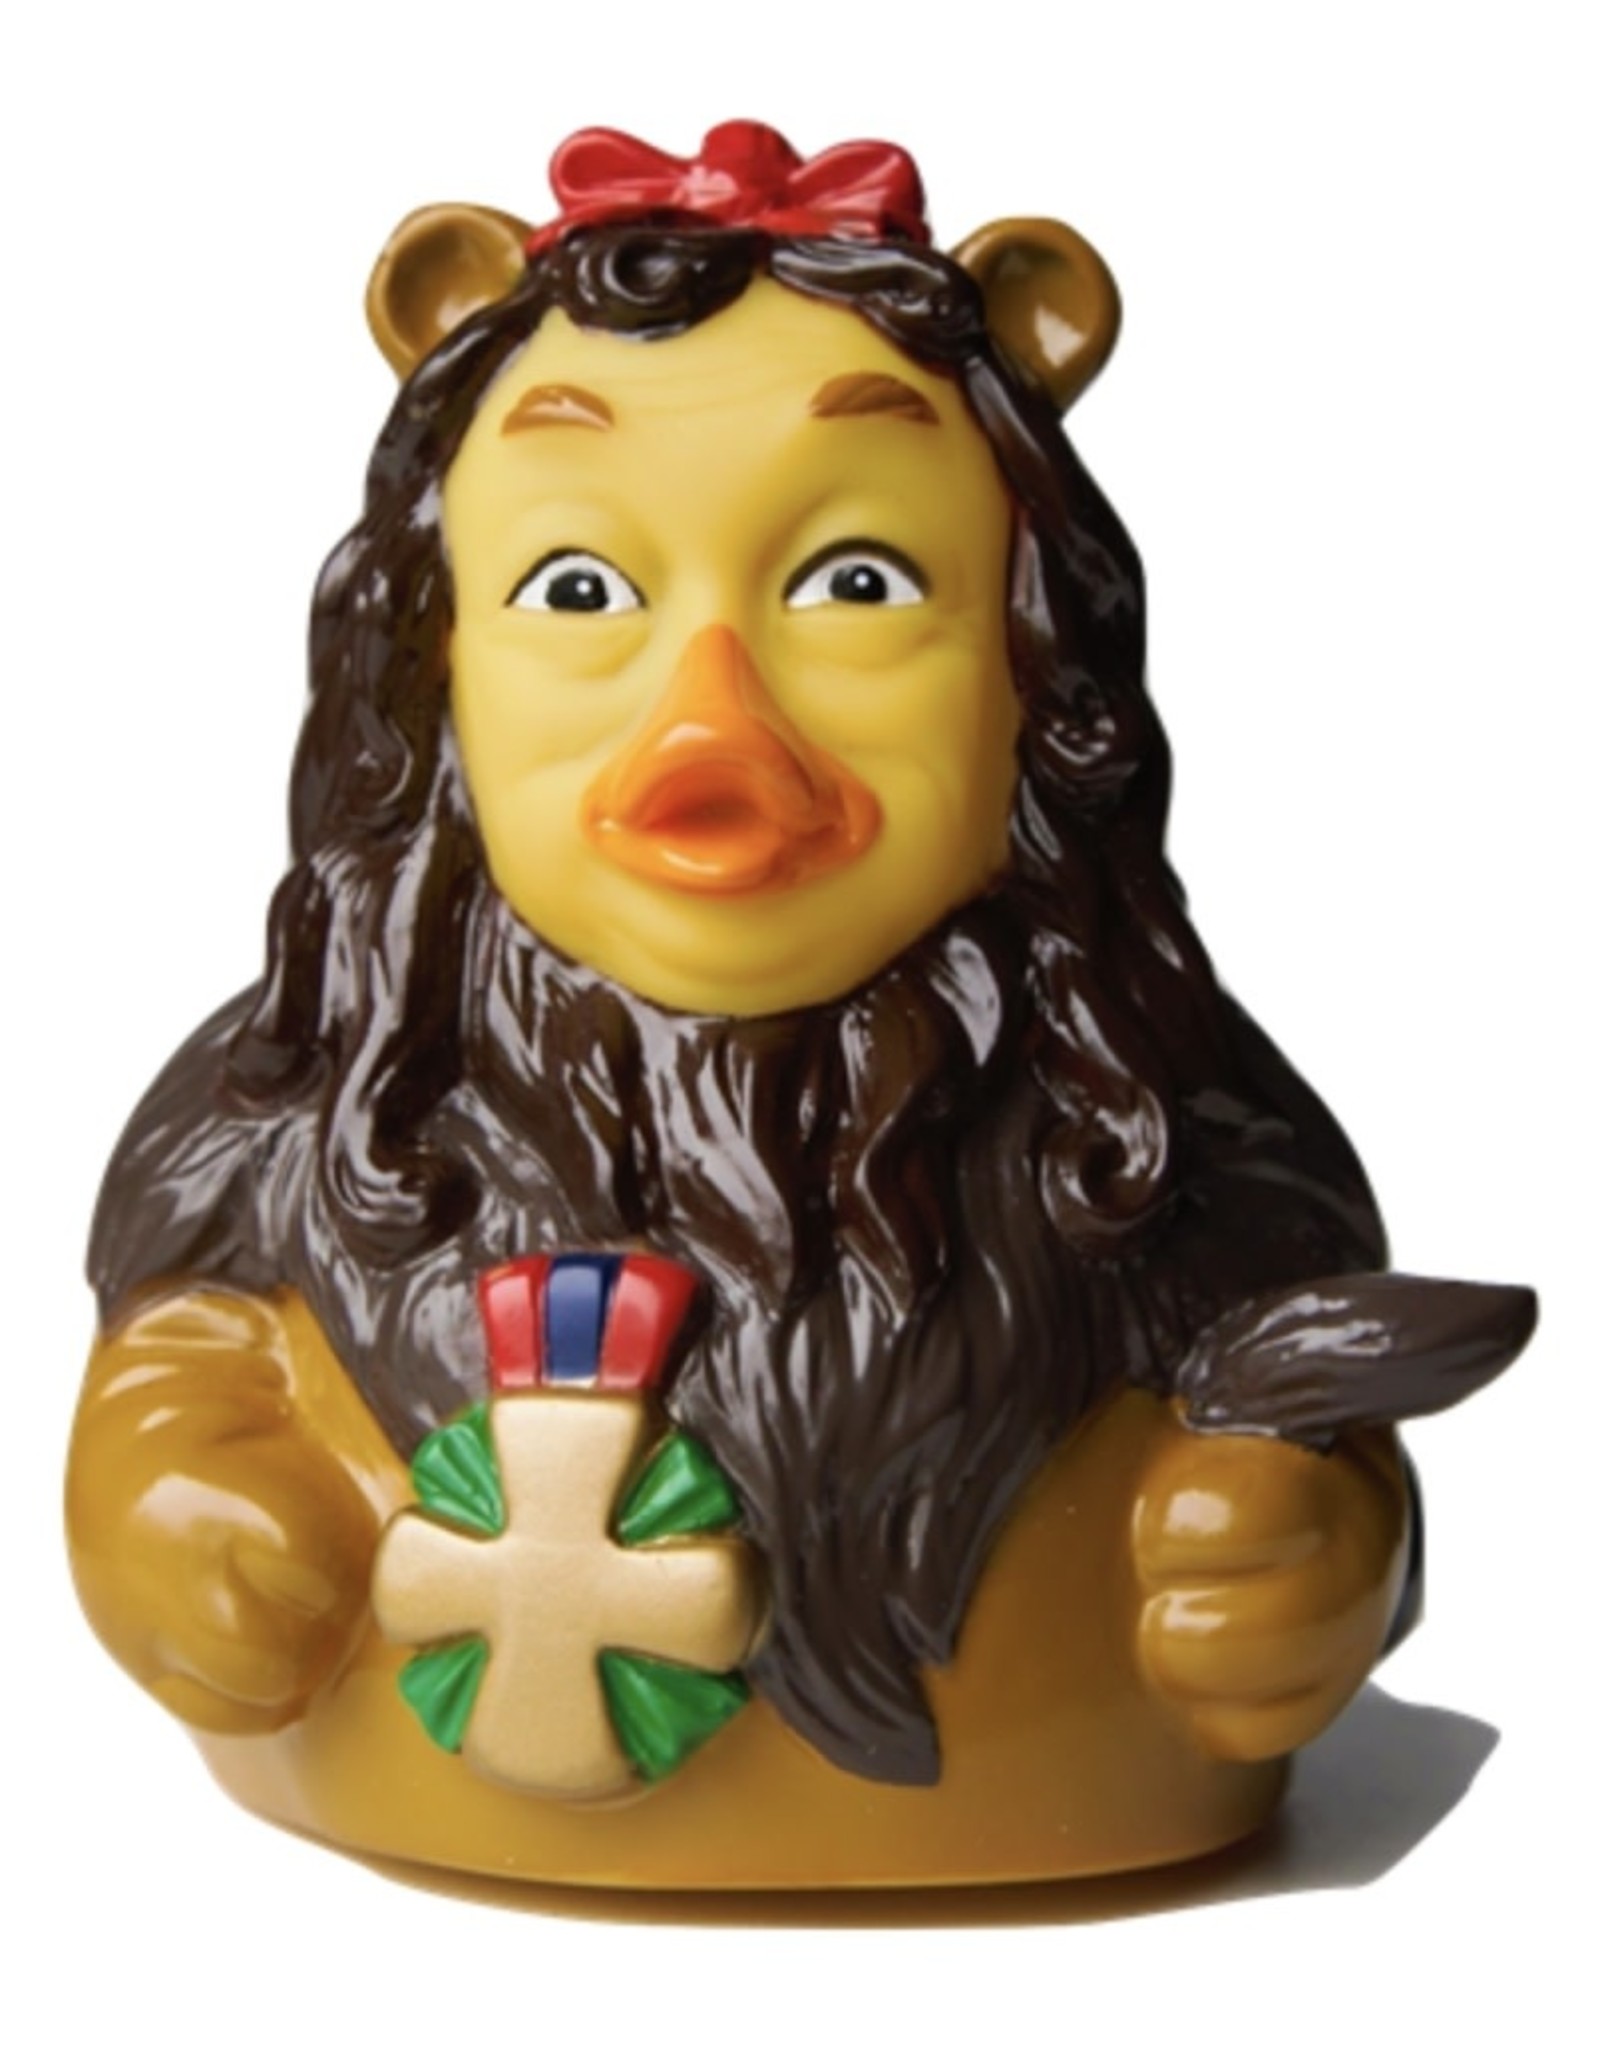 Wizard of Oz - Lion Rubber Duck